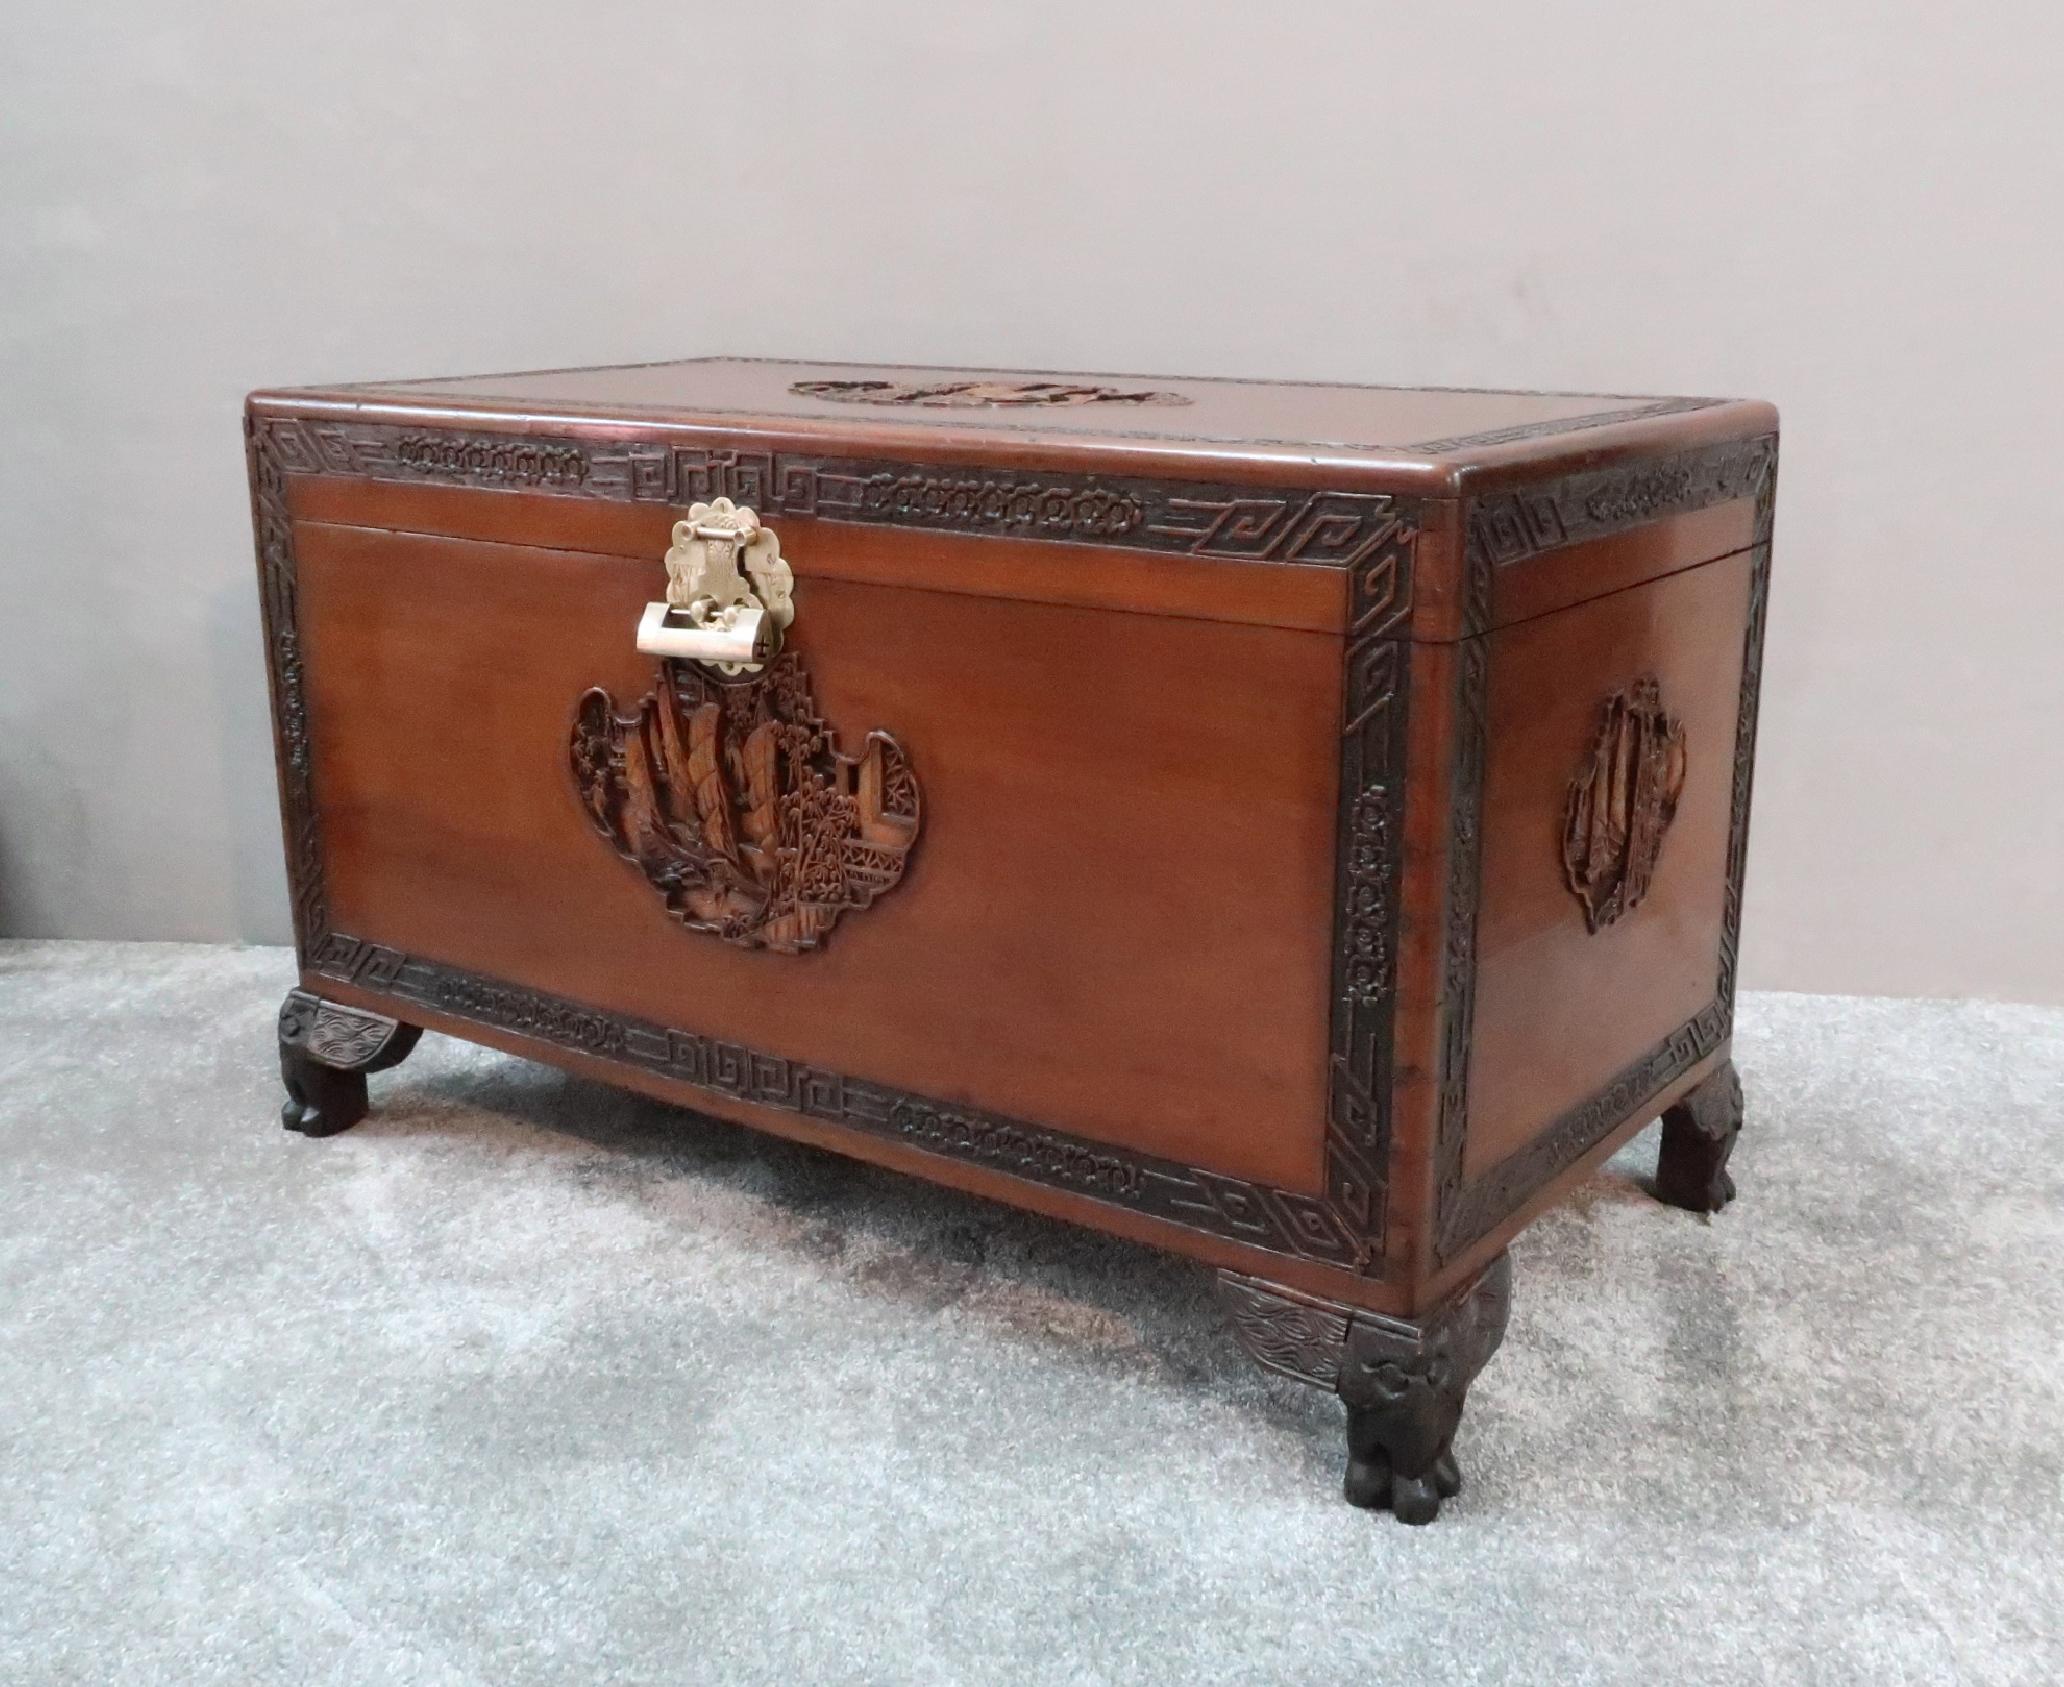 An extremely good quality early 20th century oriental freestanding teak chest with beautifully carved inset panels of sailing ships, pagodas and trees to all four sides and top with floral border stood on cabriole feet. The chest retains its